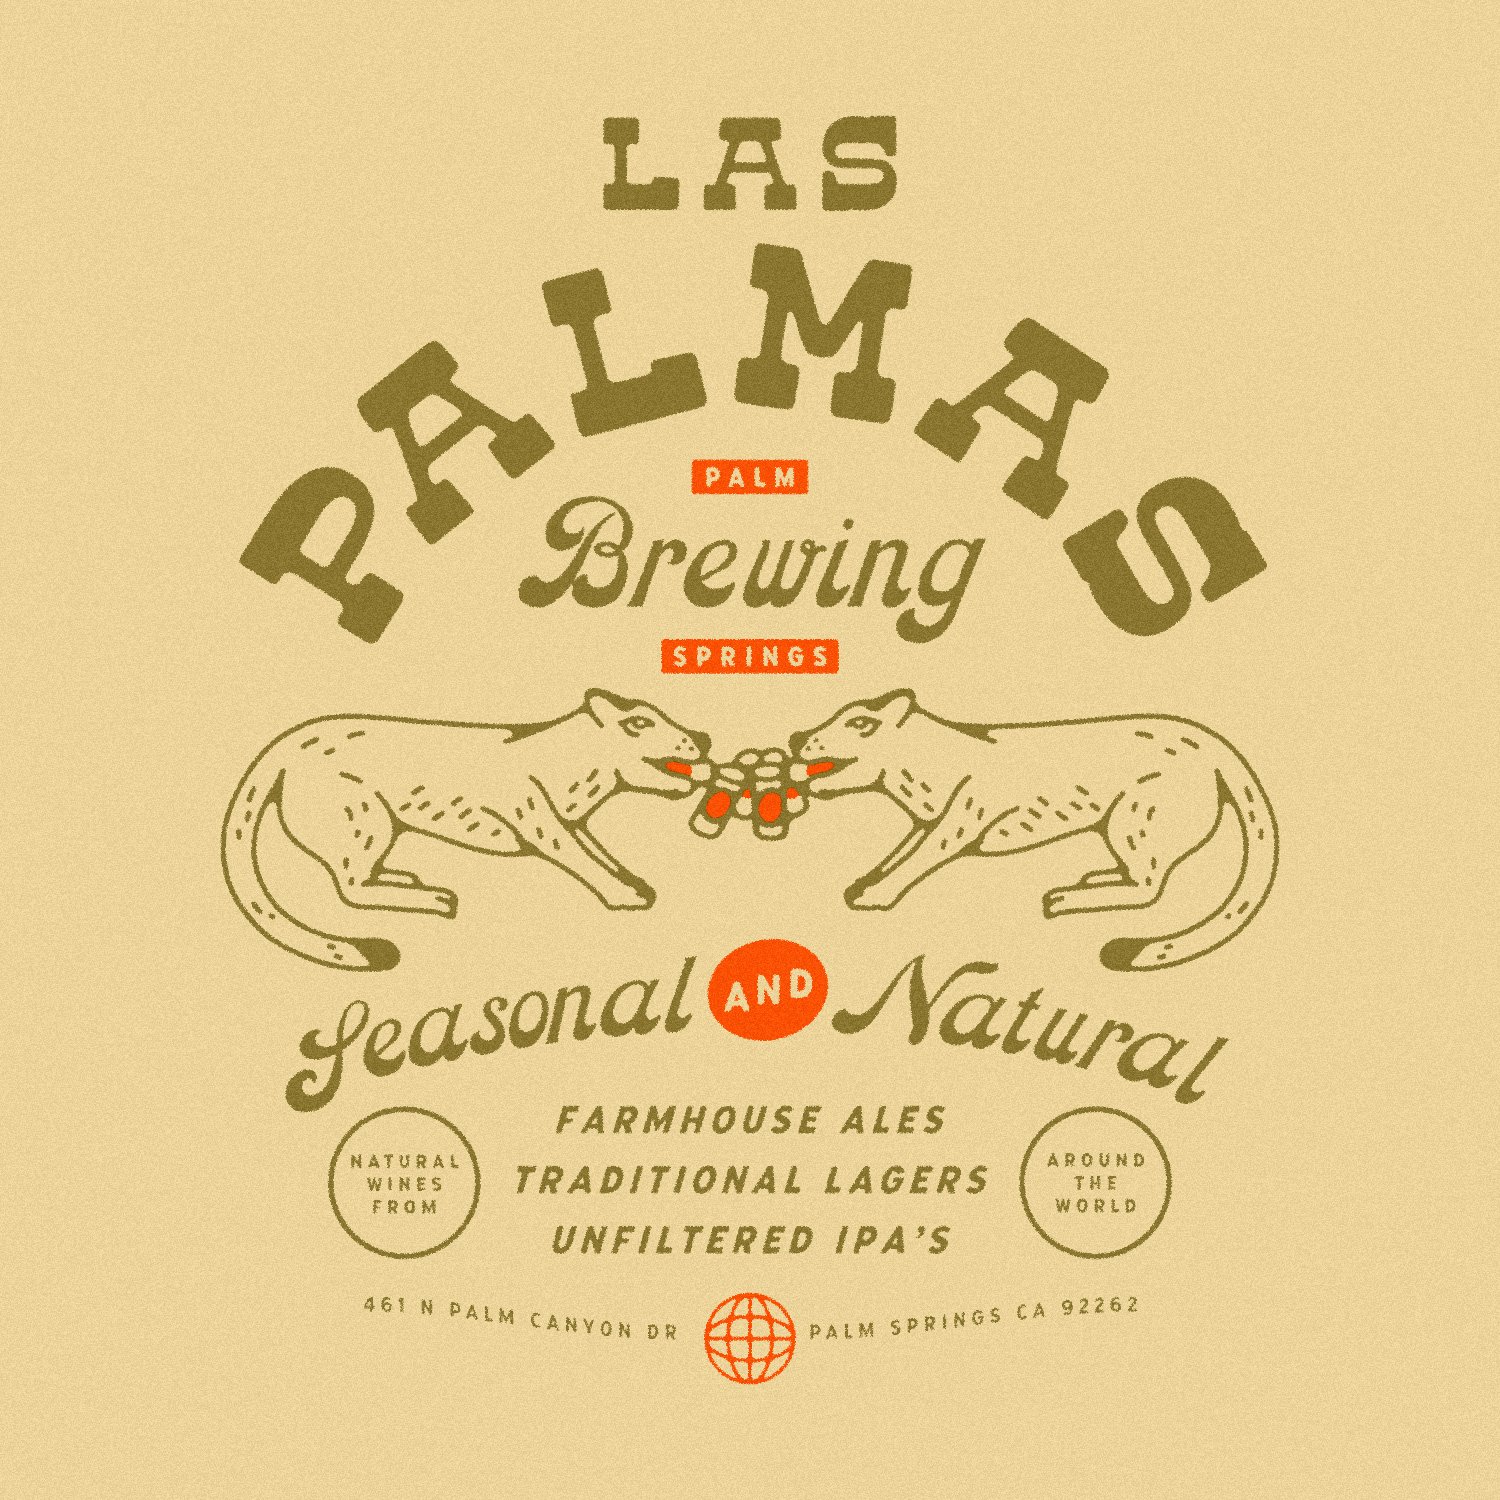  Las Palmas Brewing shirt graphic by Cactus Country. 